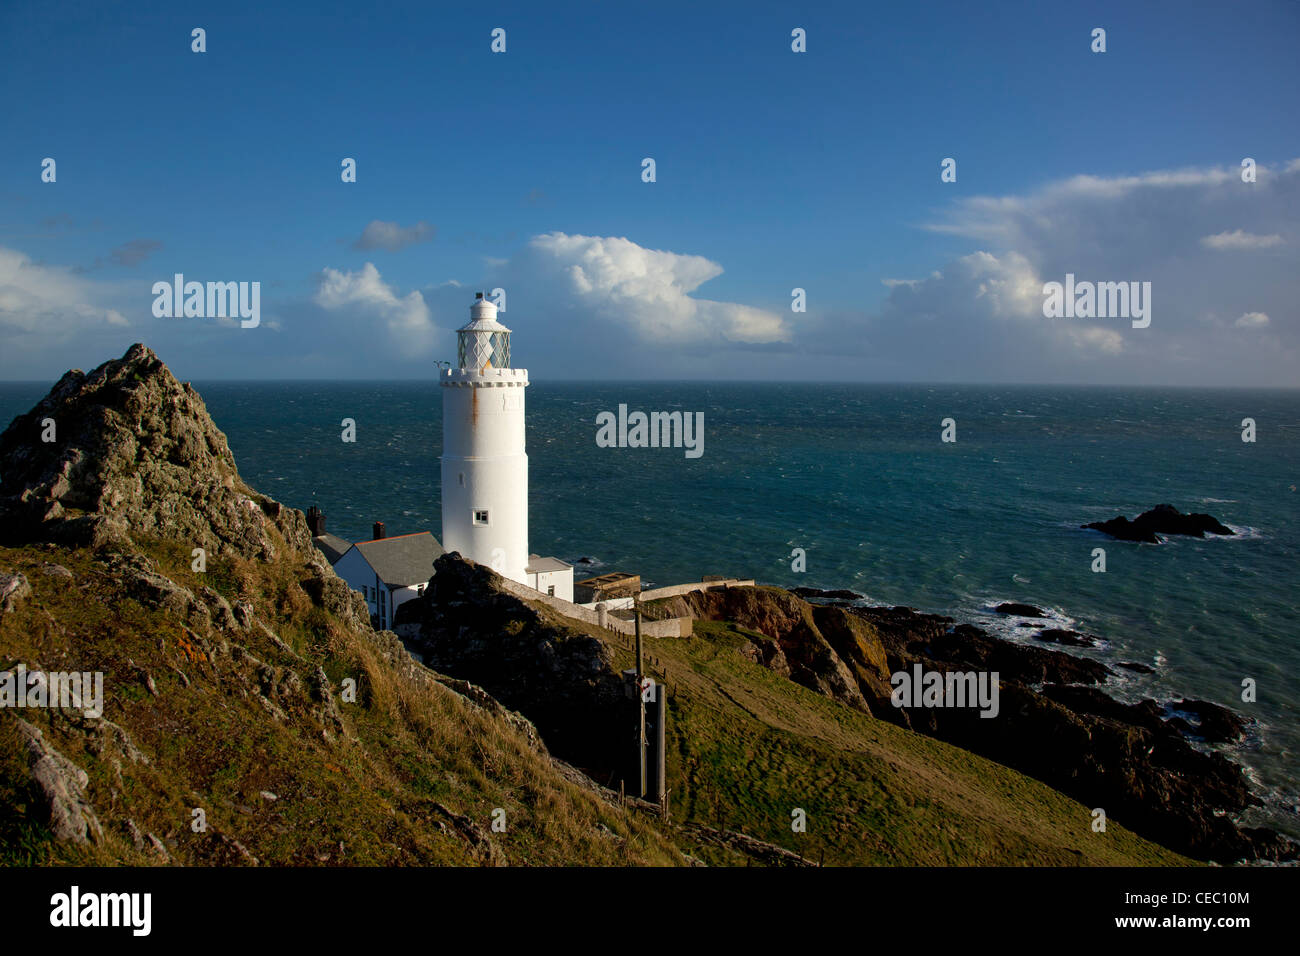 Start point lighthouse over looking the English channel and coastline of south Devon, England. Stock Photo